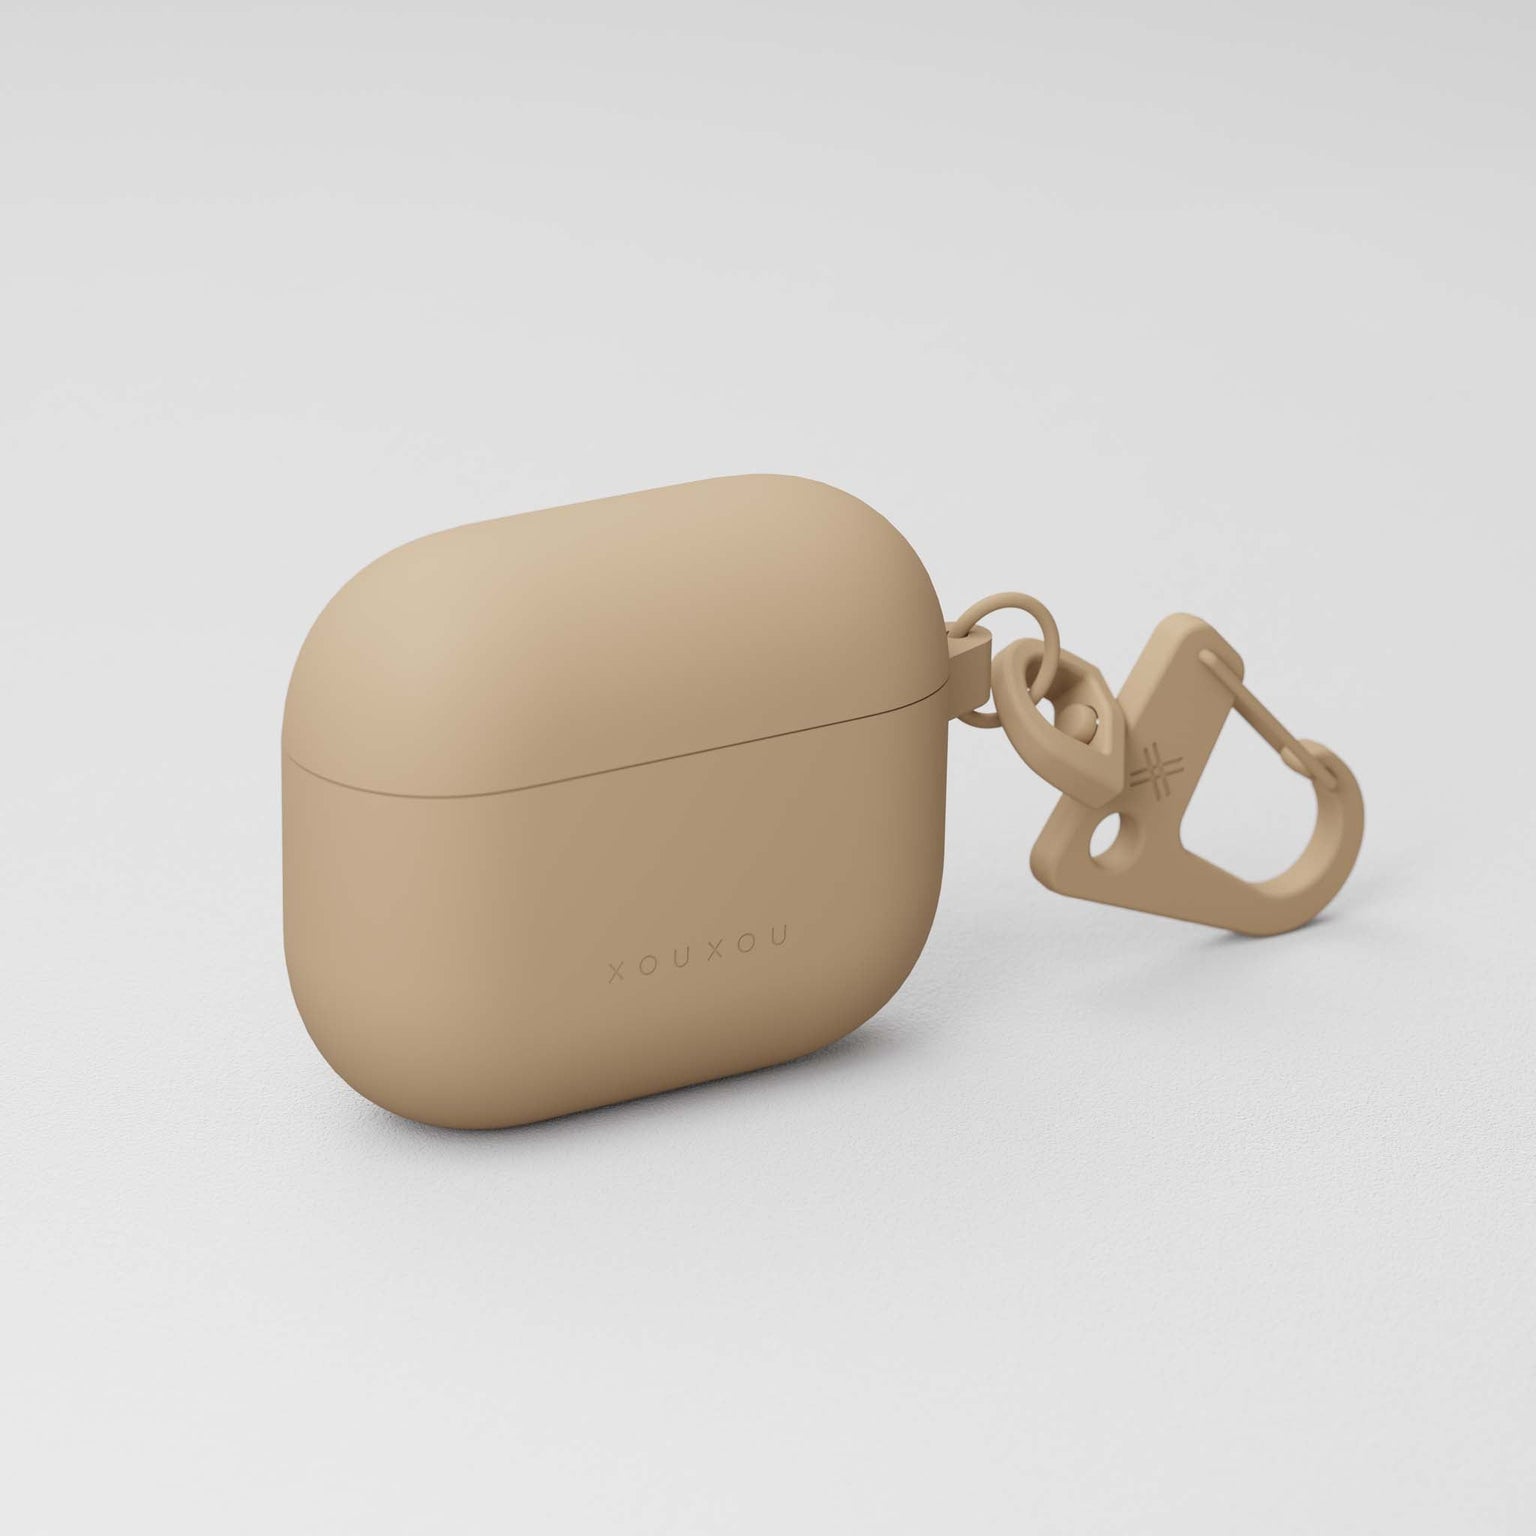 3rd gen. AirPods case in Sand Brown soft-touch finish | XOUXOU